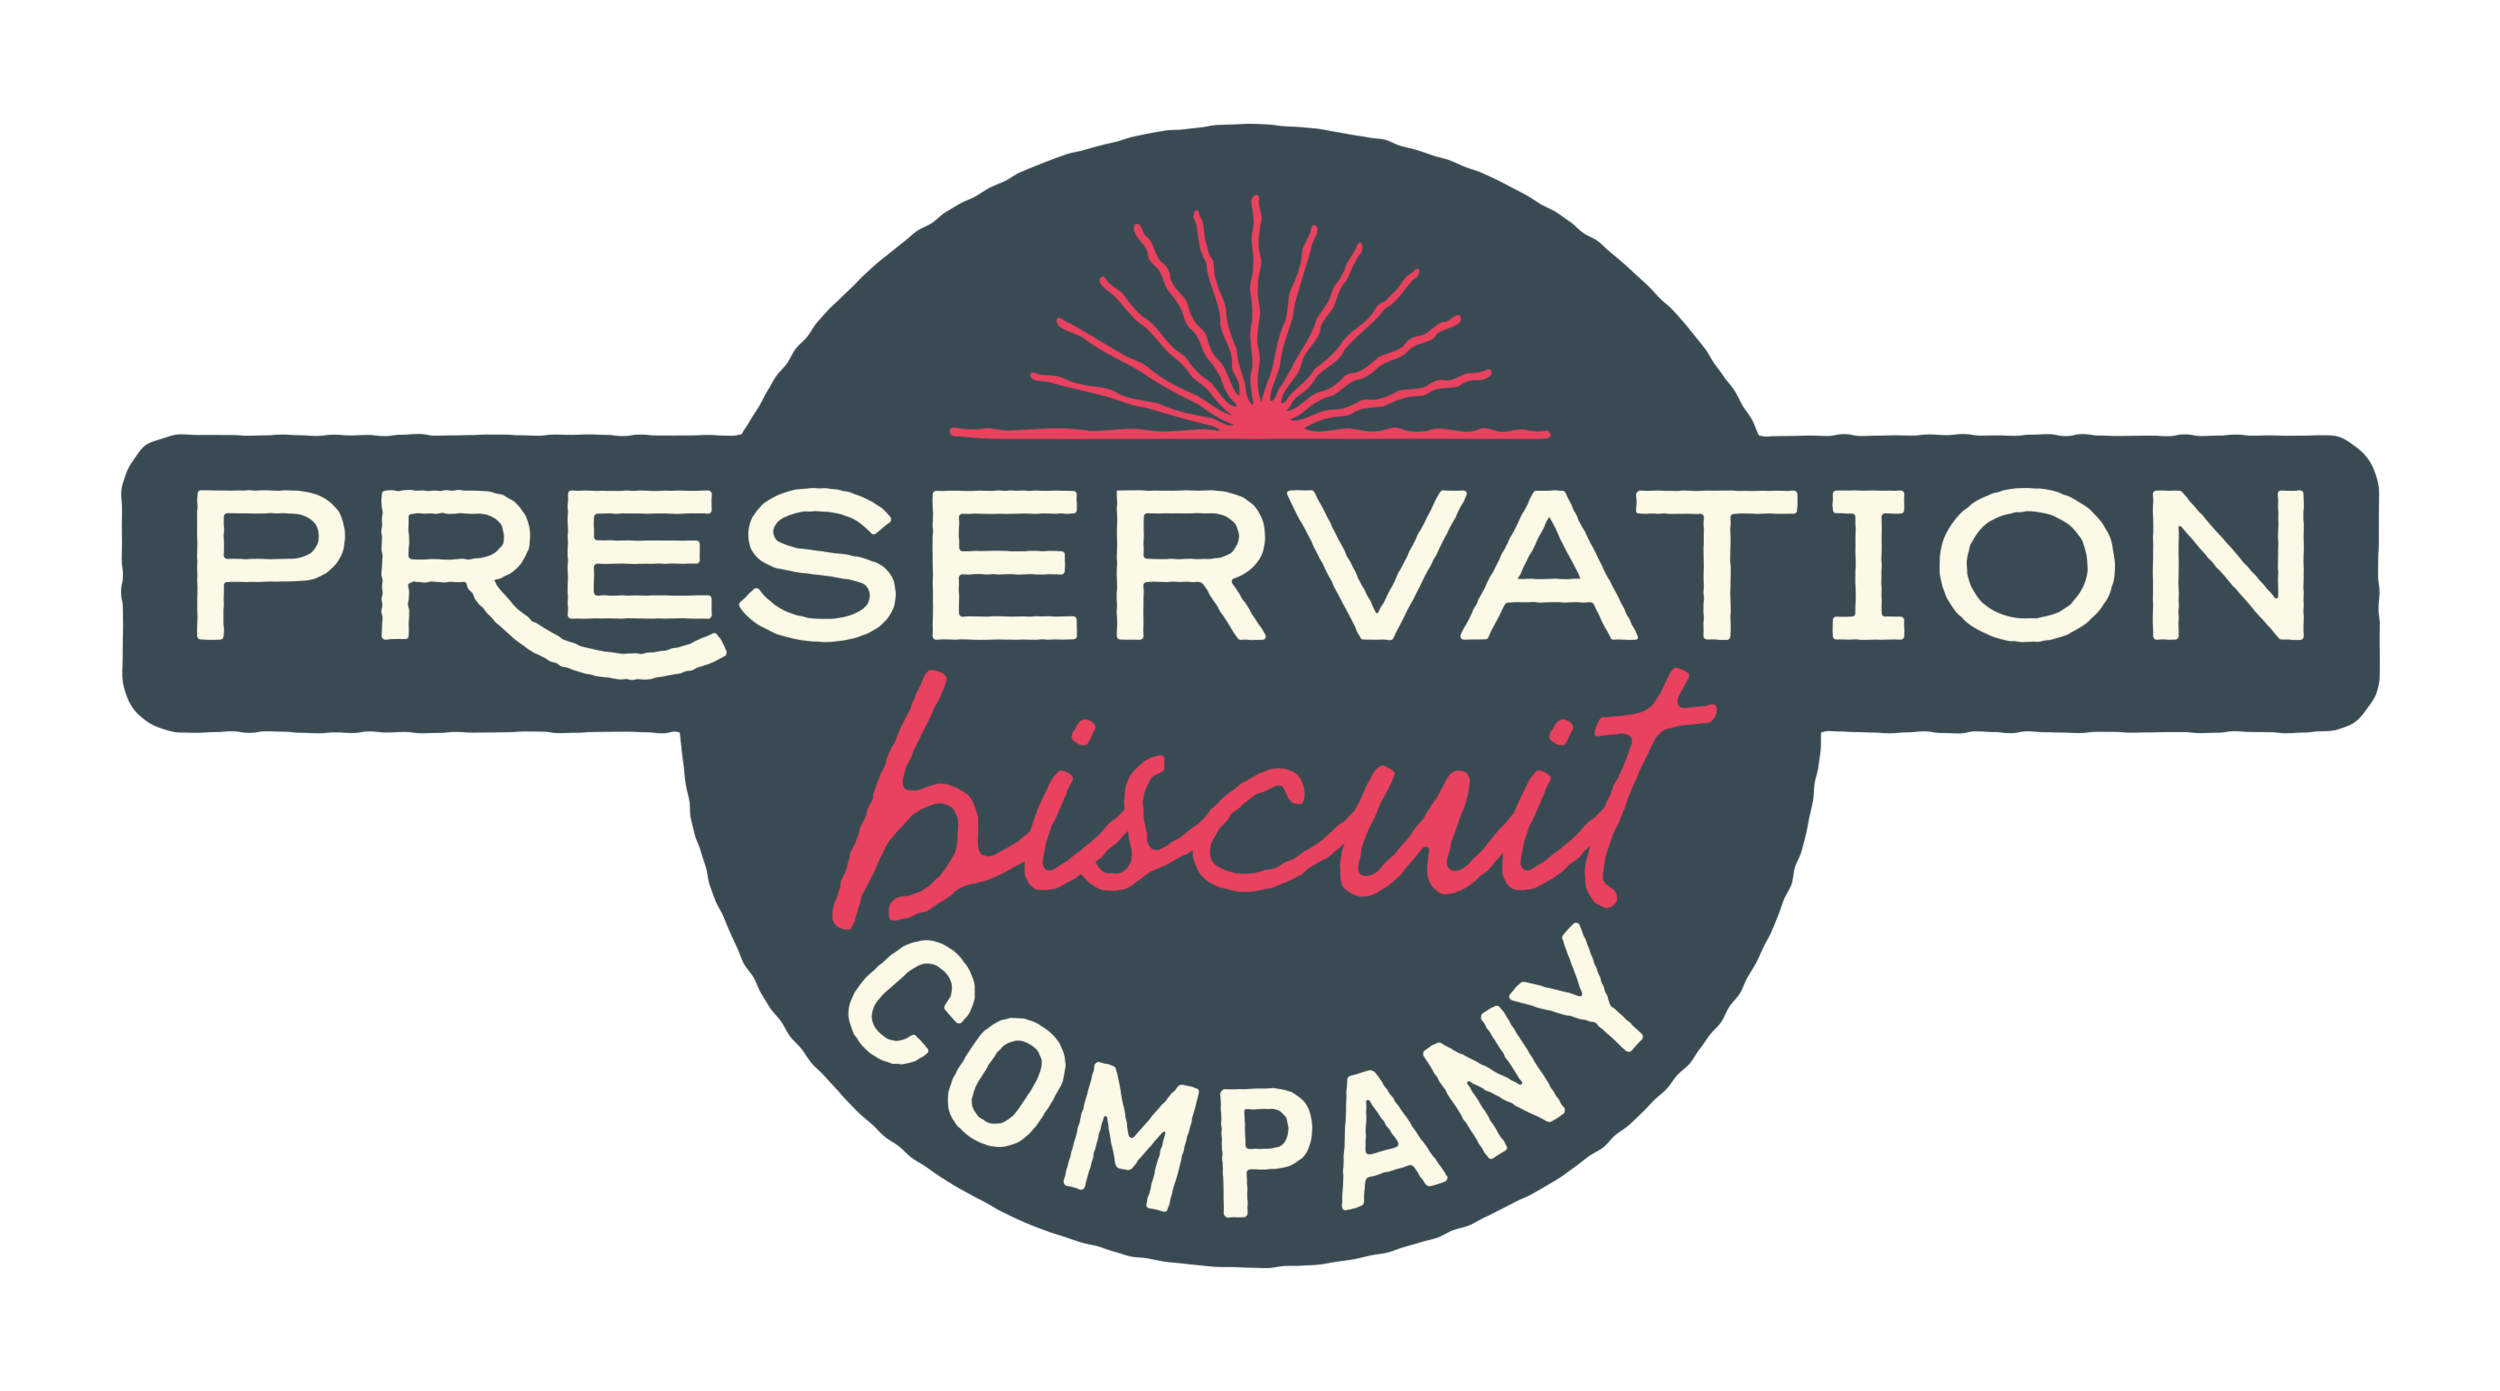 Preservation Biscuit Company